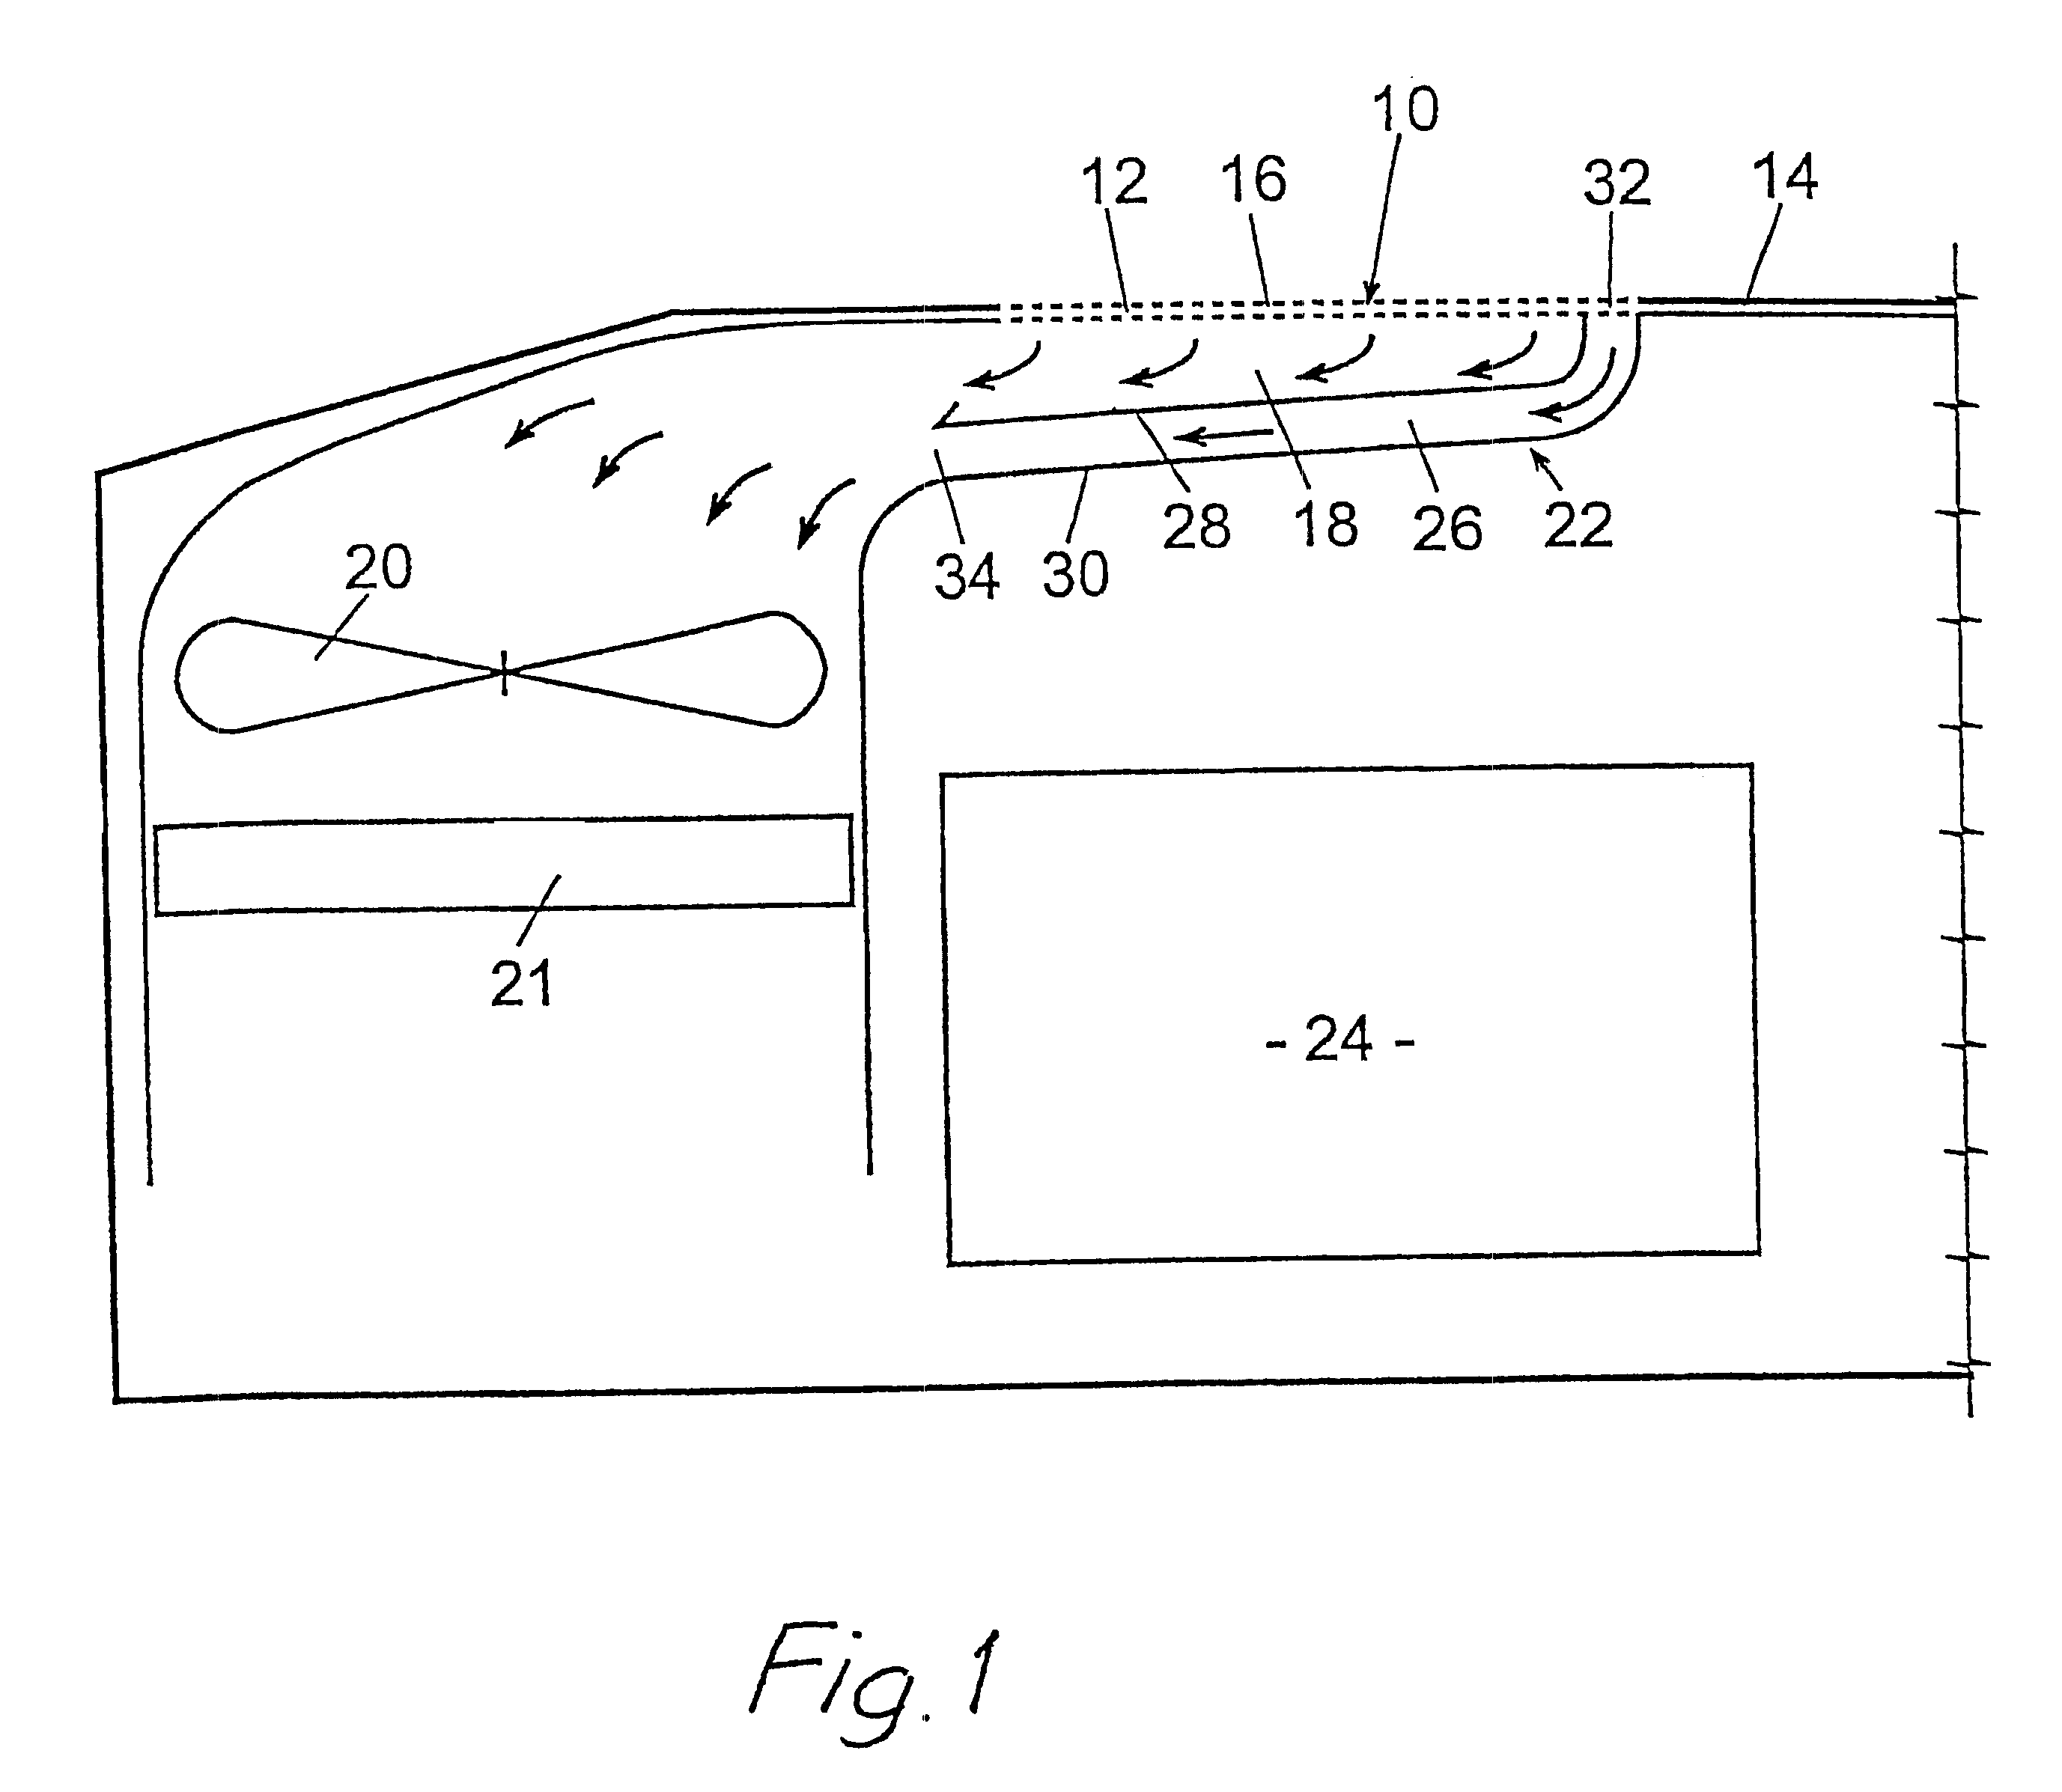 Air intake for a motorized vehicle